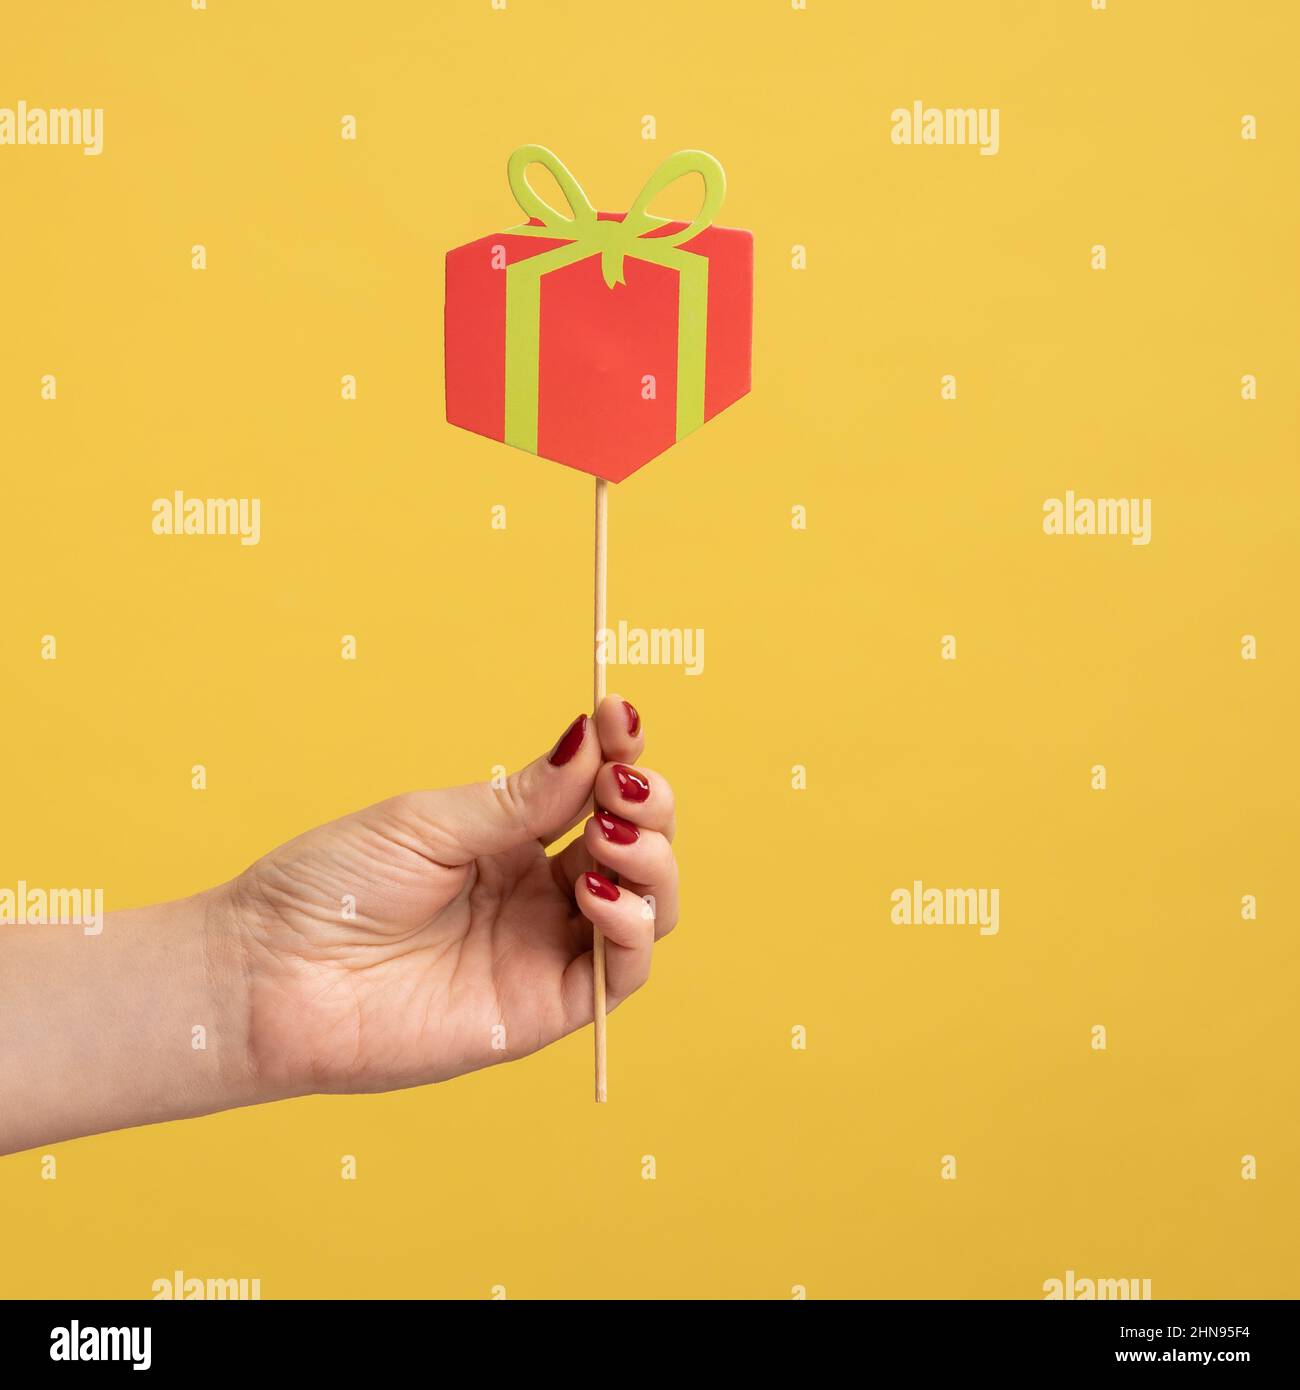 Closeup side view portrait of woman hand holding festive party props, red little paper present box on stick, celebrating holiday. Indoor studio shot isolated on yellow background. Stock Photo